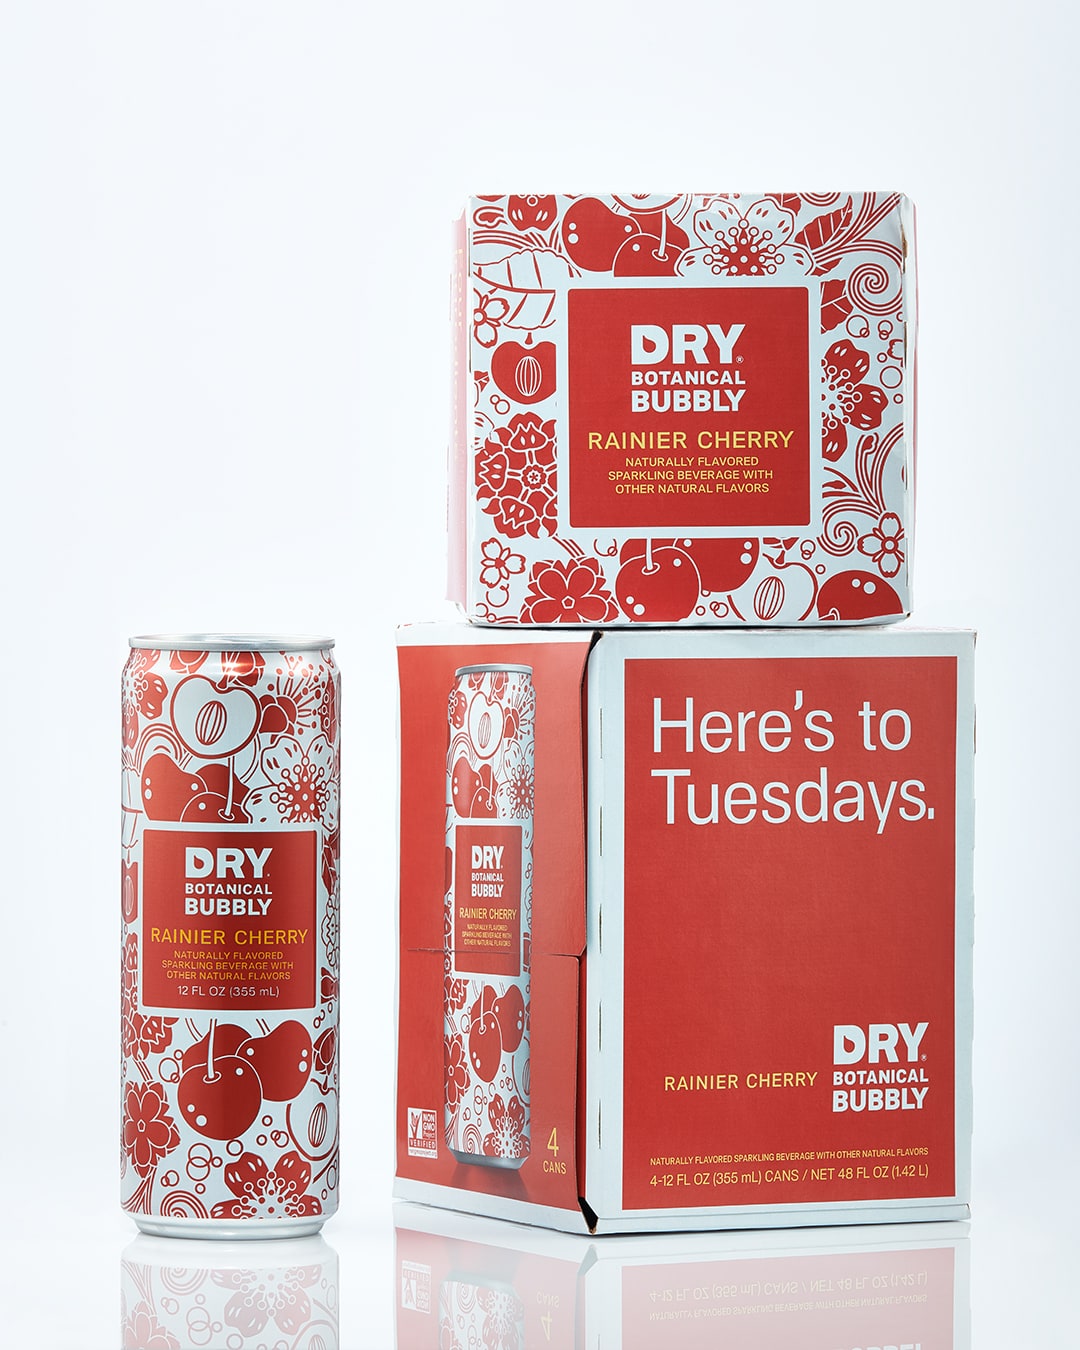 Dry Botanical Bubbly can and packaging design cherry flavor